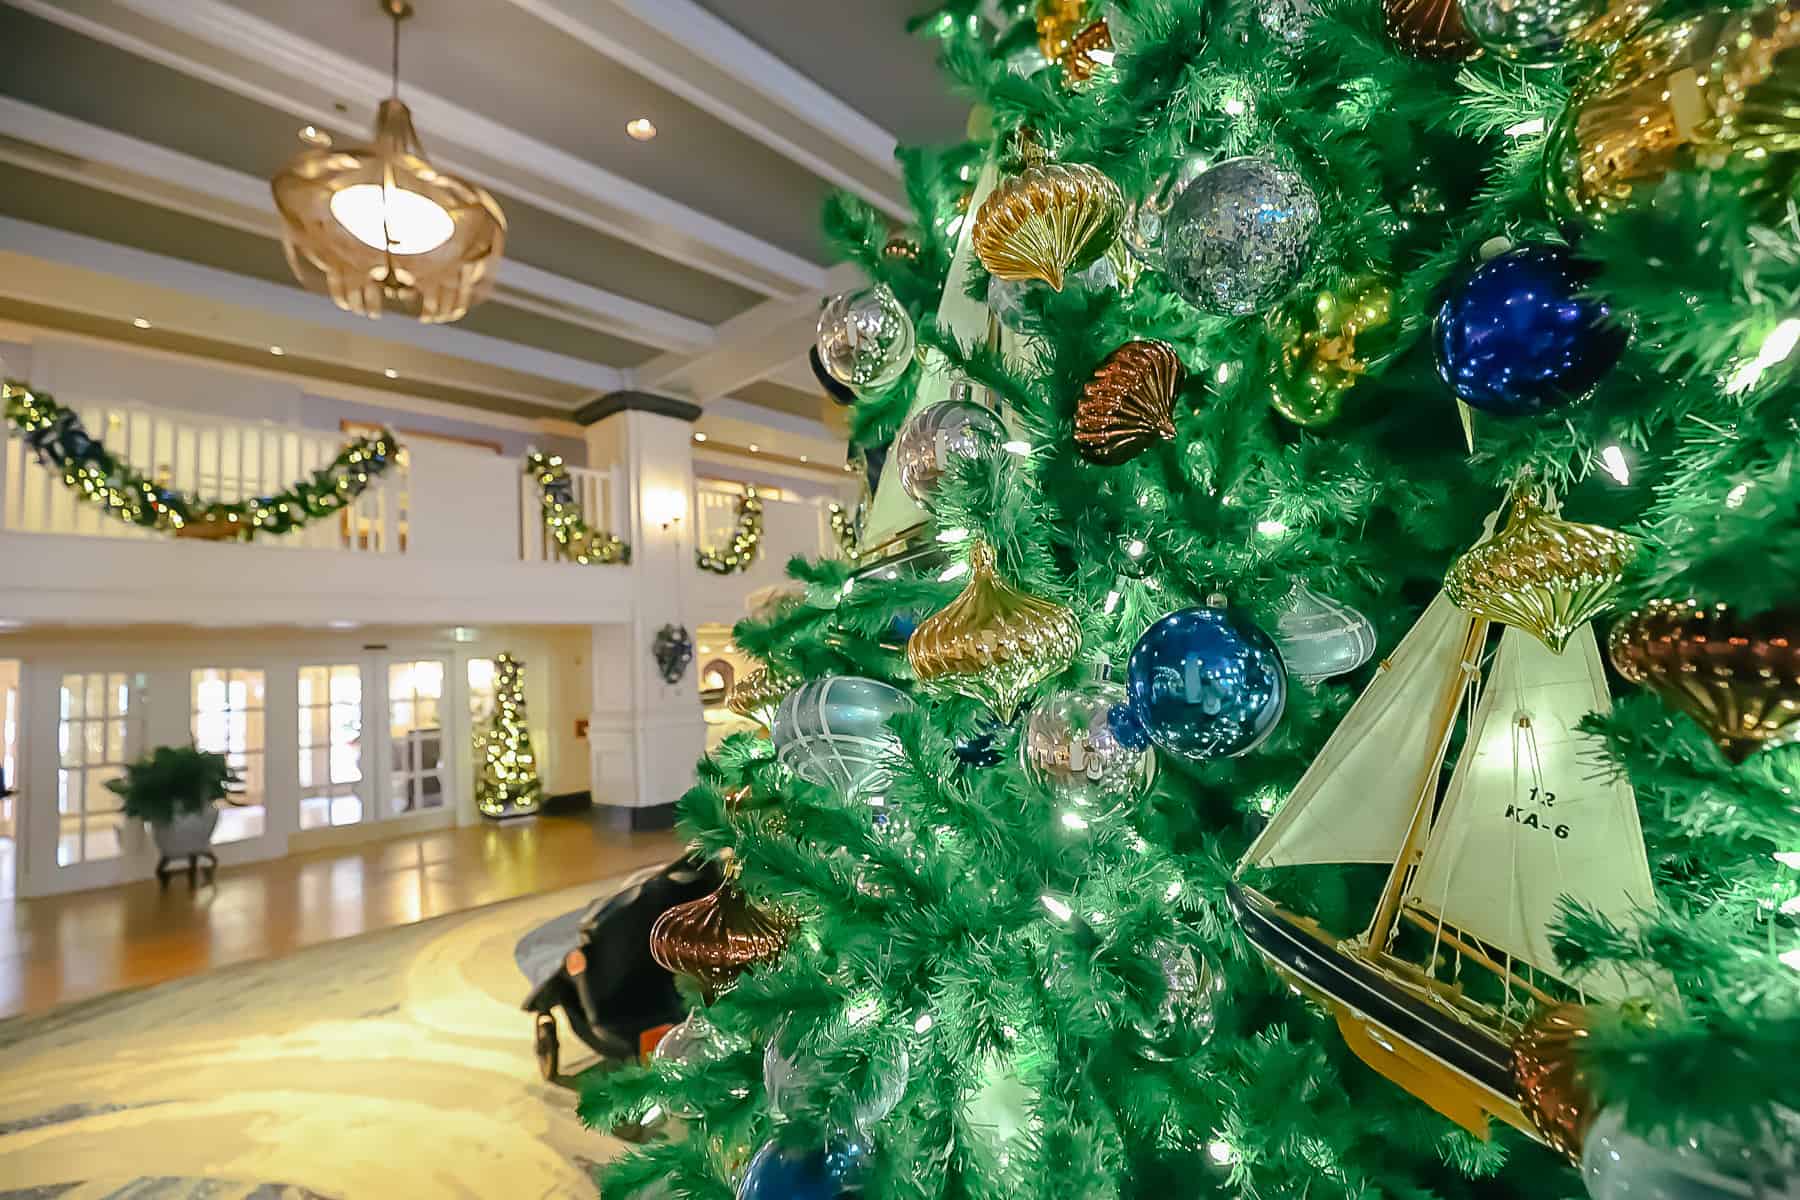 partial view of the Christmas tree looking toward the resort's front doors